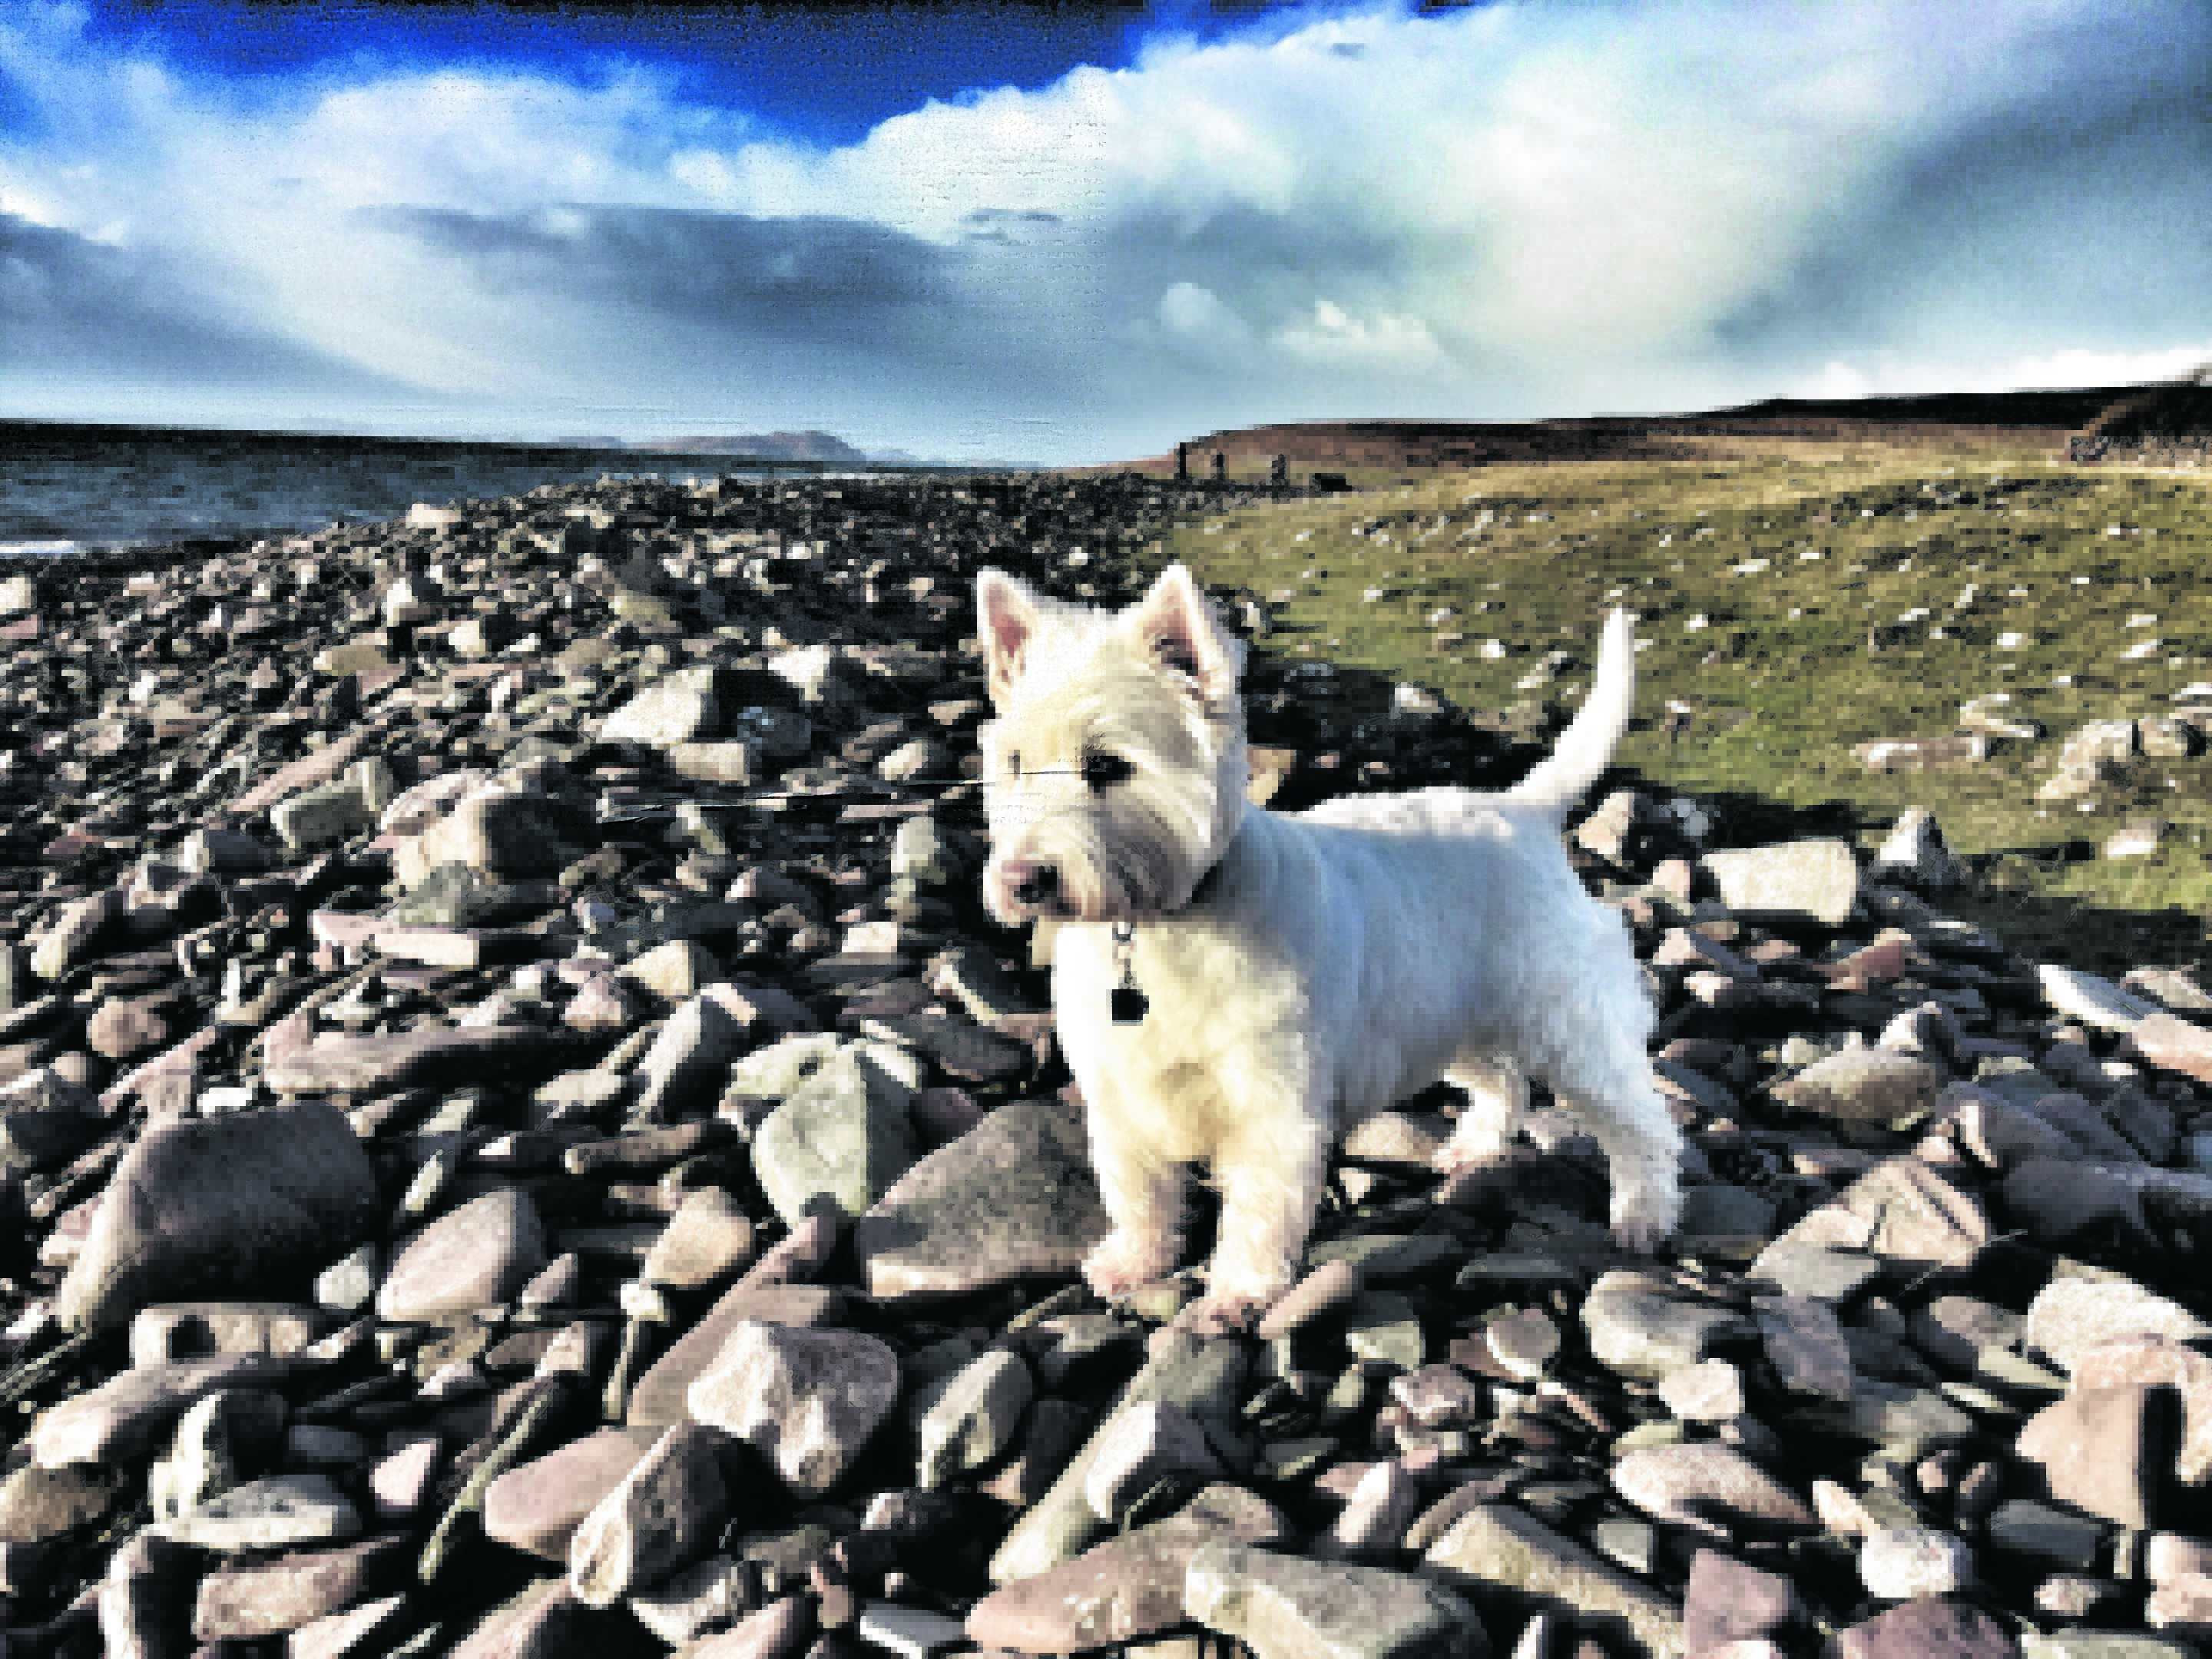 Daisy Wood on holiday in Achiltibuie near Ullapool. Daisy lives with Alice Wood in Inverness.